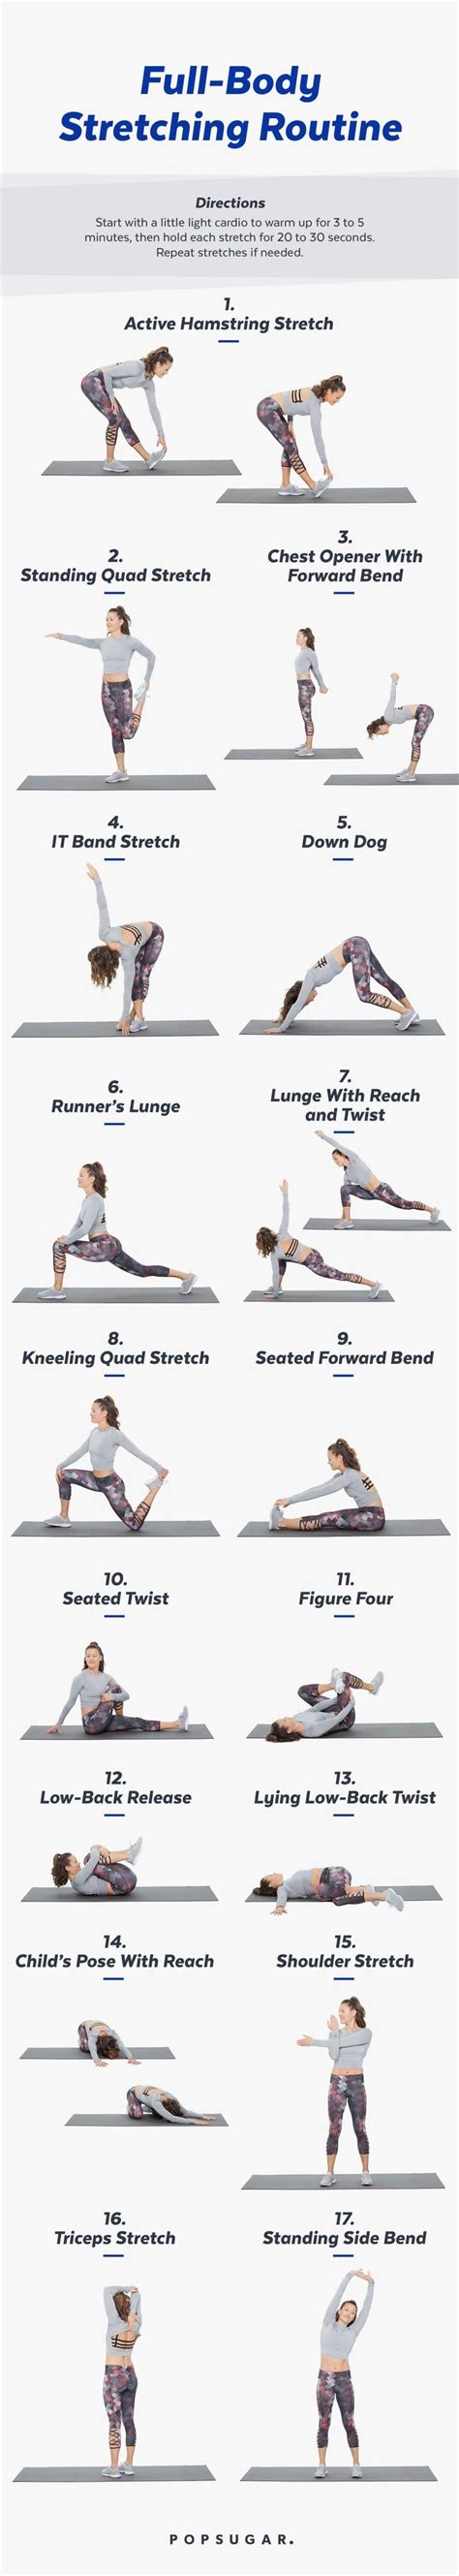 Stretching Is The Best Way To Care For Tired Muscles This Sequence Of Stretches With